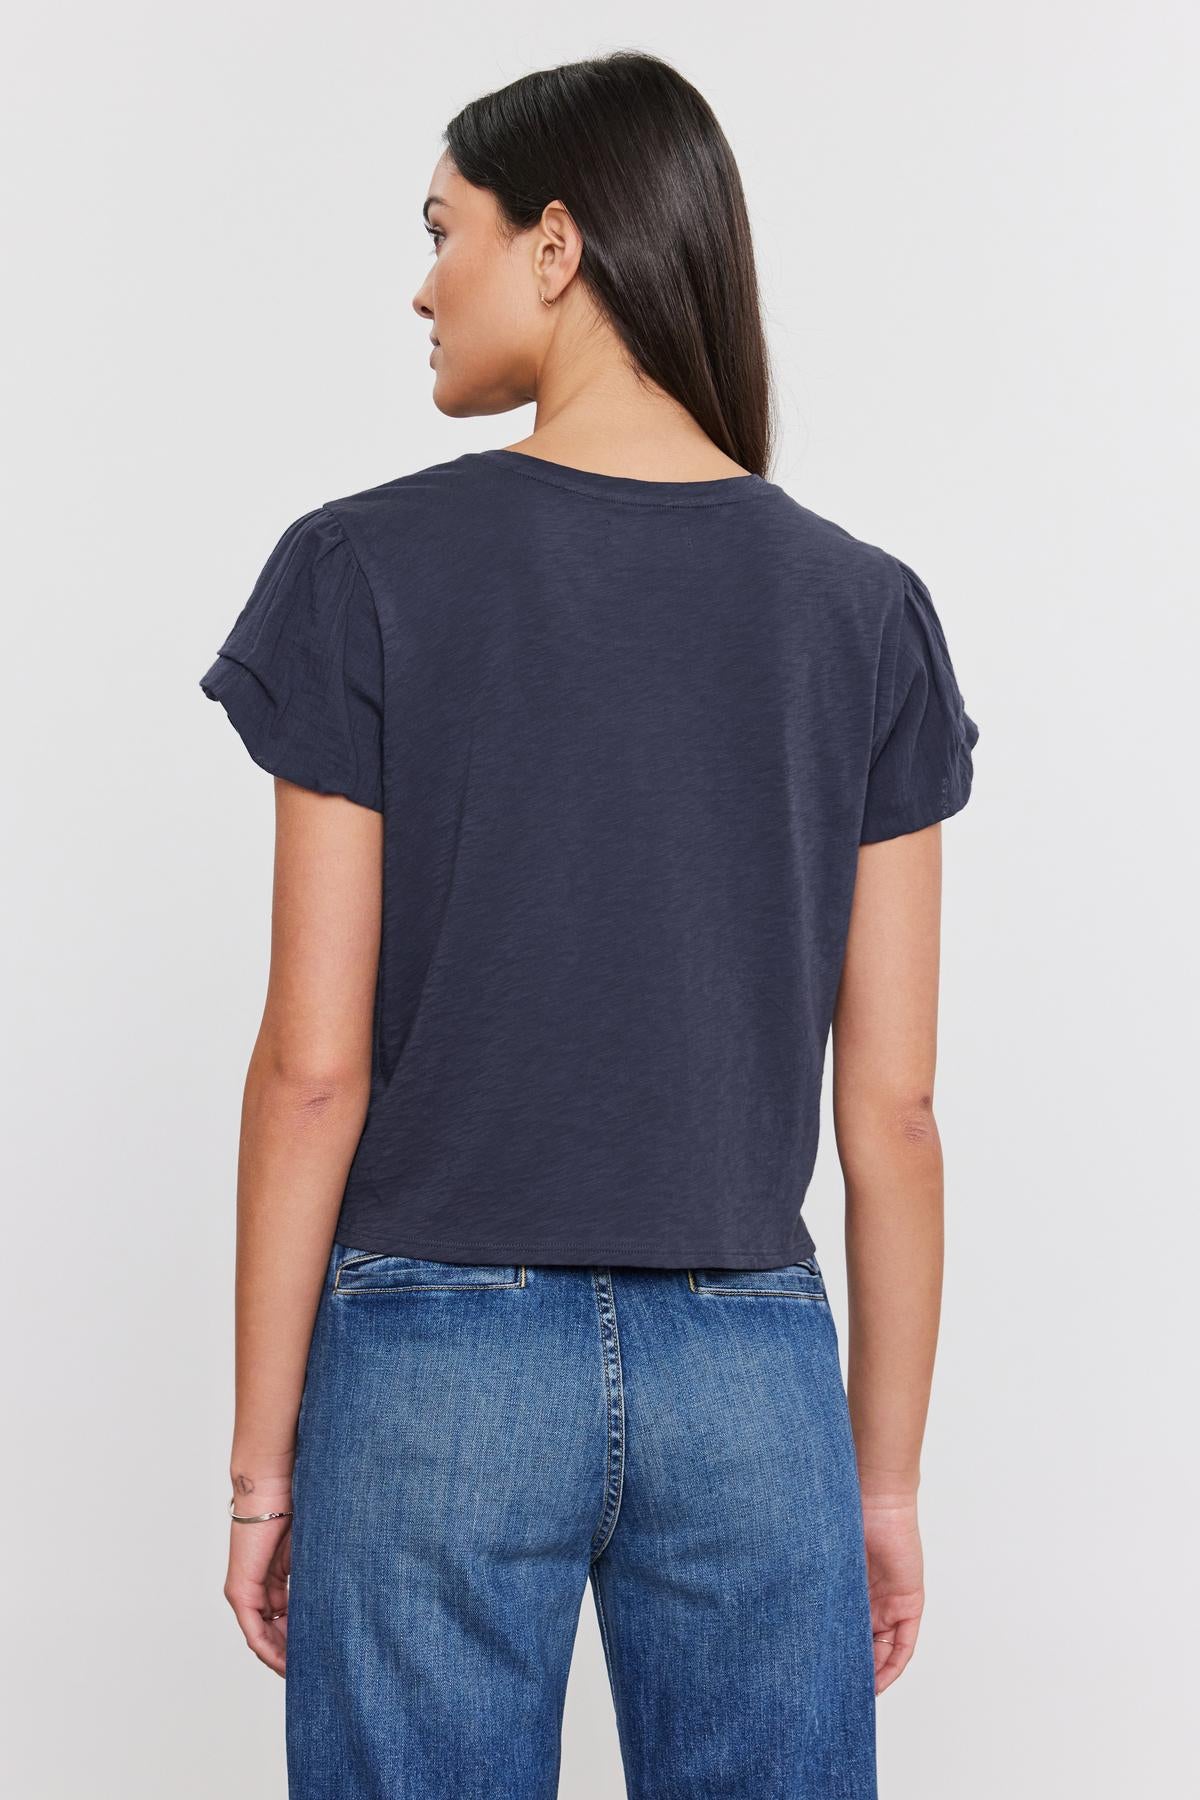 Woman viewed from behind, wearing a dark blue cotton slub DELLA TEE with pleated sleeve detail and blue jeans, standing against a white background. (Brand Name: Velvet by Graham & Spencer)-36805187338433